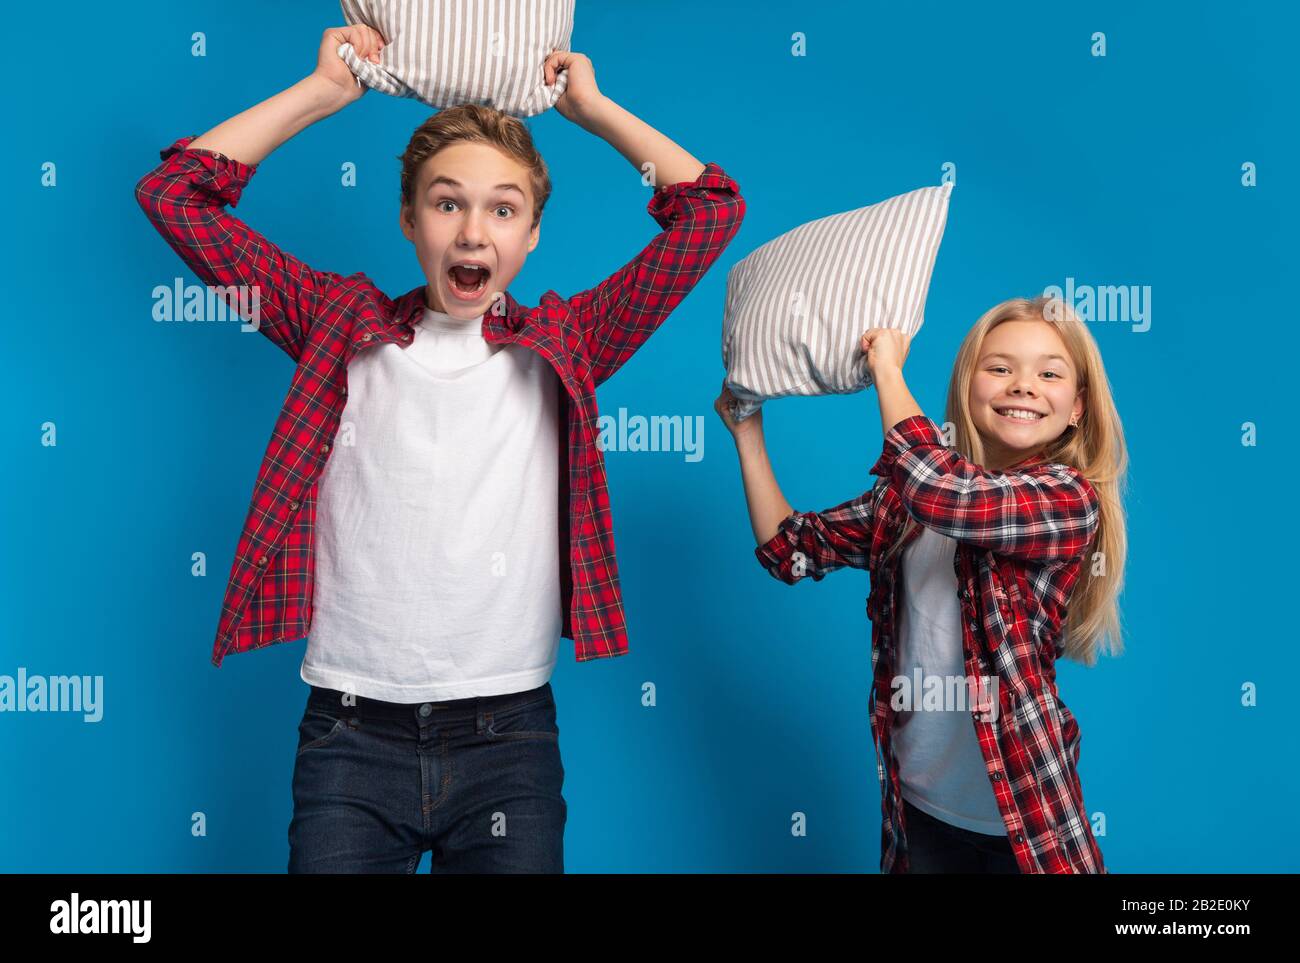 Playful Little Boy And Girl Fighting With Pillows At Camera Stock Photo